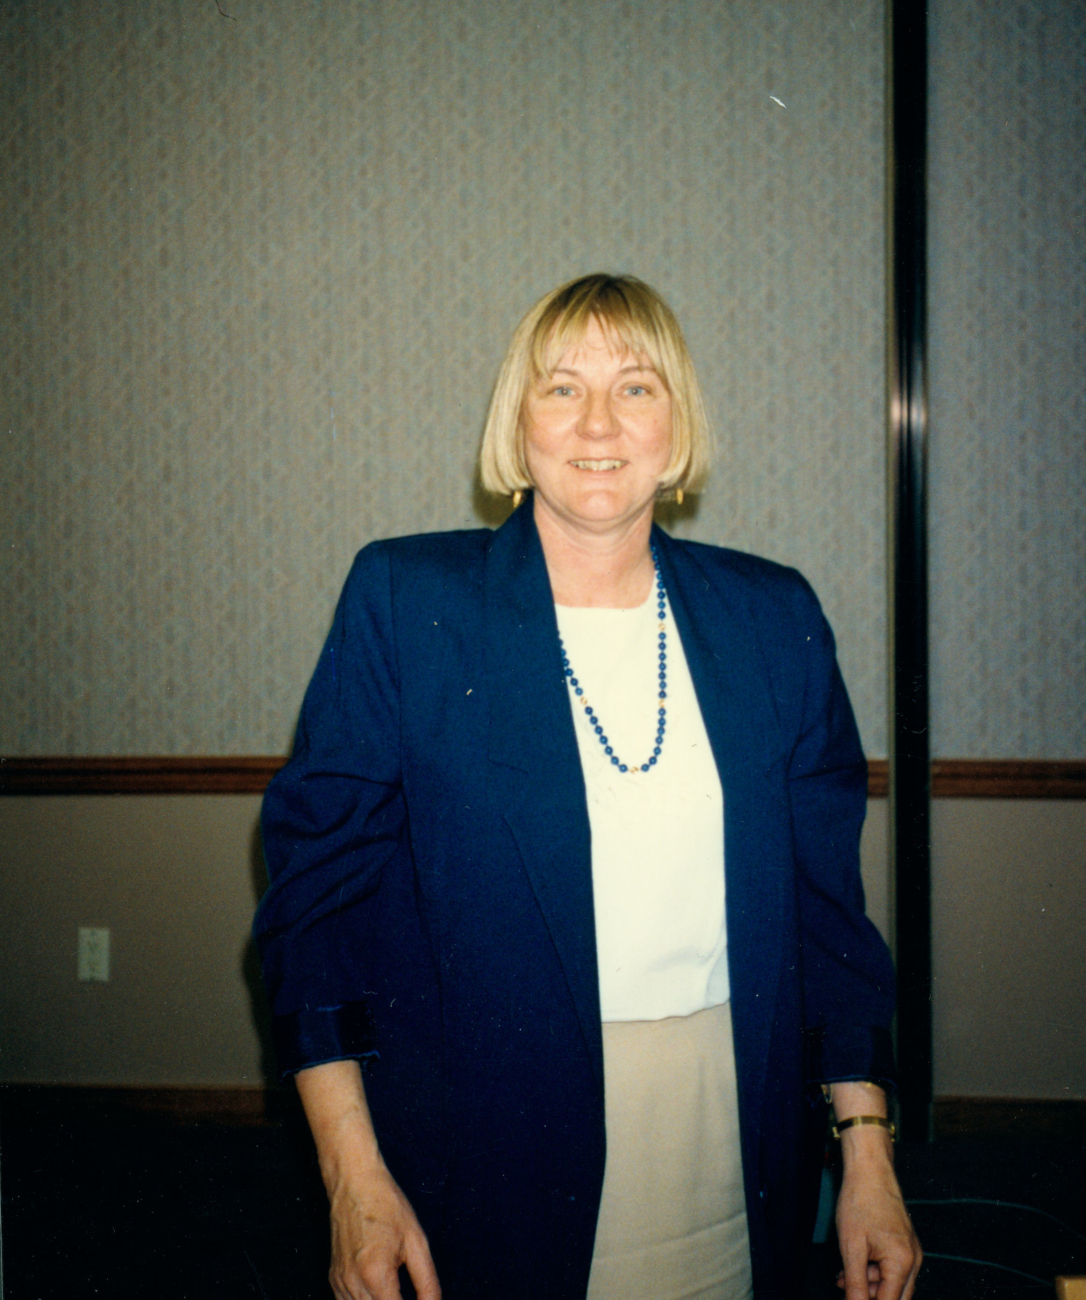 Janice Beattie, head of reference, and then Director of the NOAA Central Library from 1998 -2009